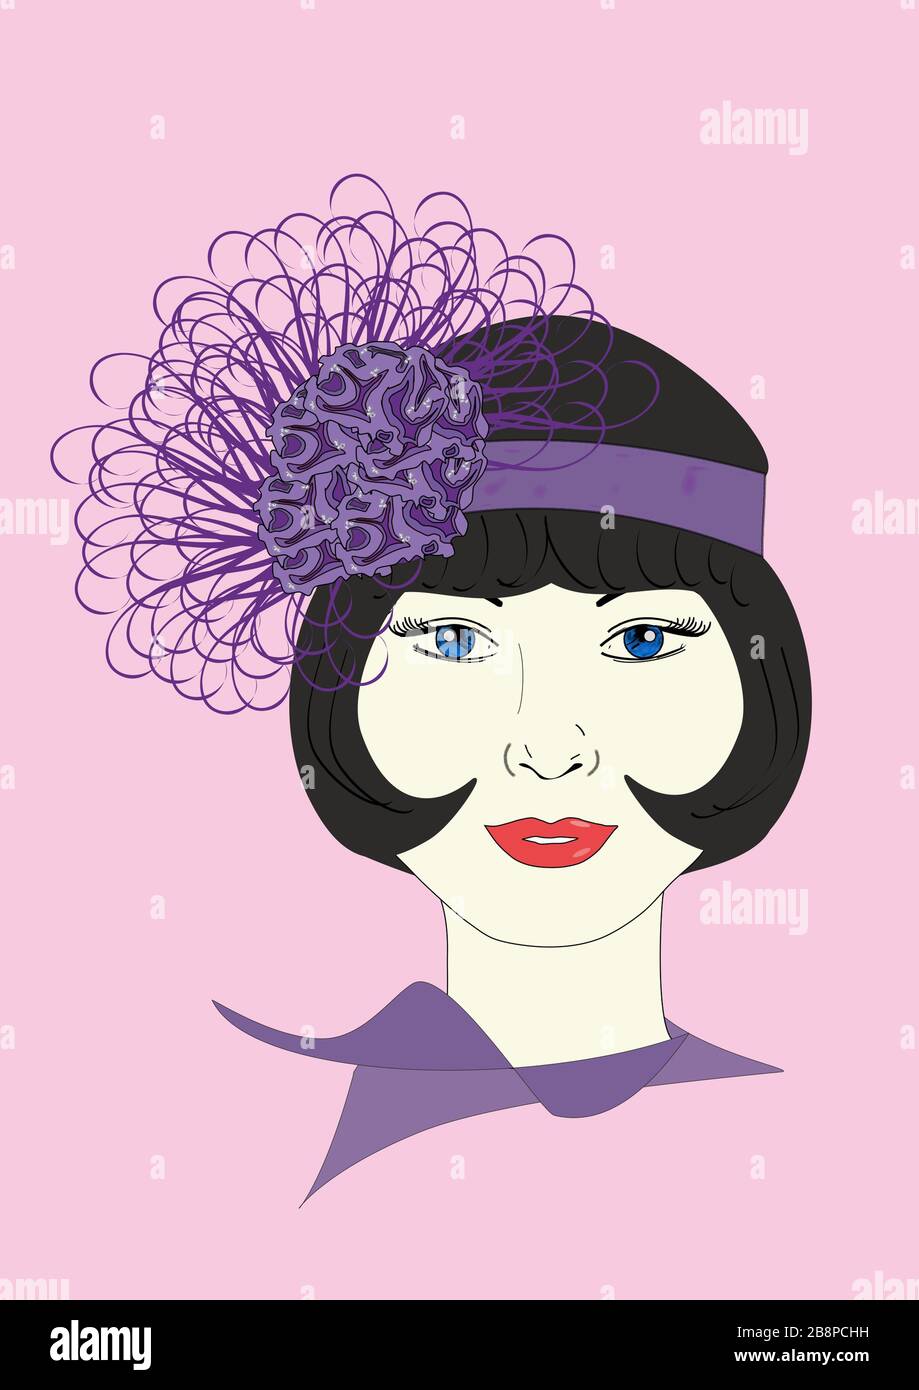 A graphic illustration of a 1920s Flapper in an ornate lavender headpiece. Stock Photo